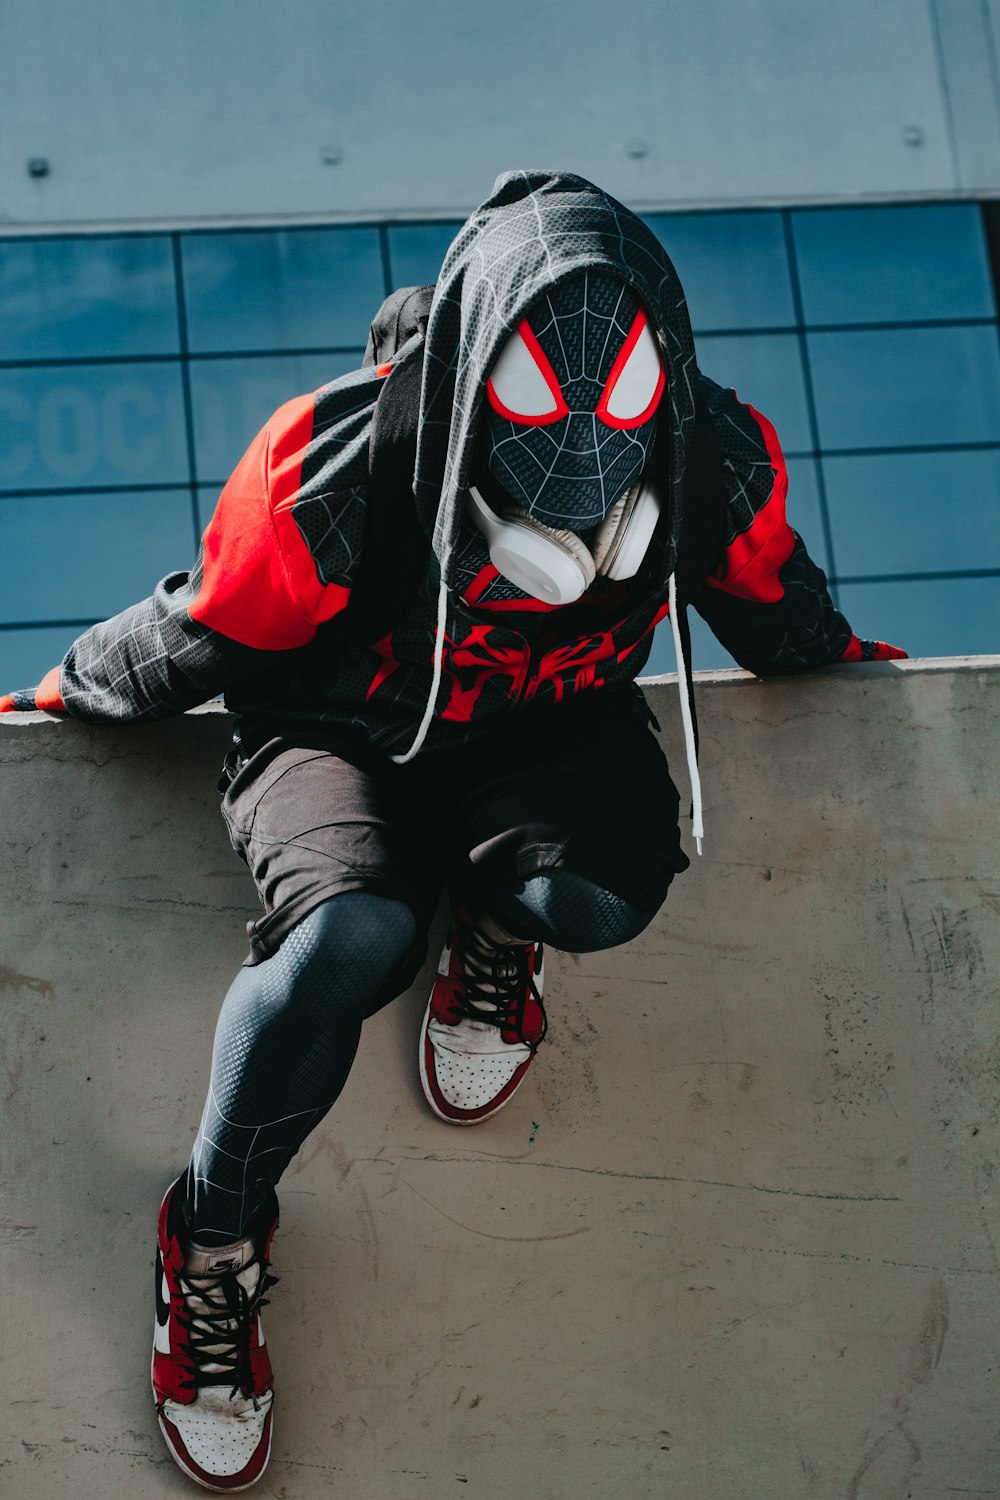 a person wearing a spider man mask on a skateboard